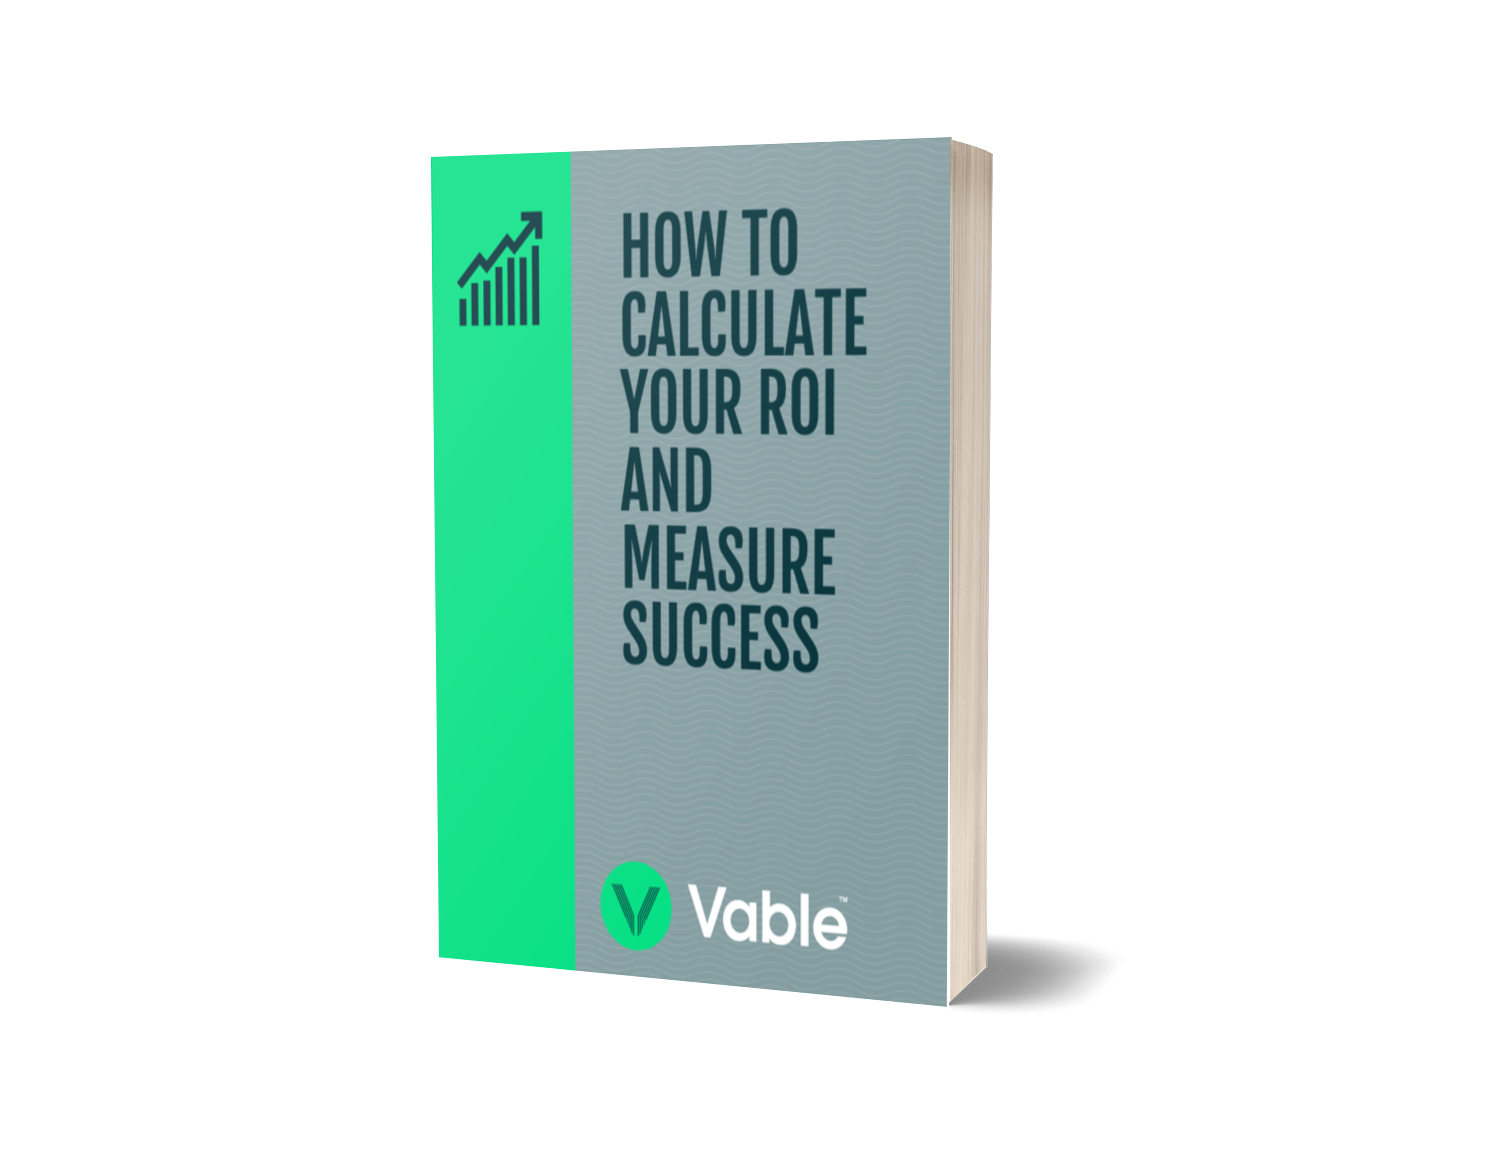 how to calculate ROI